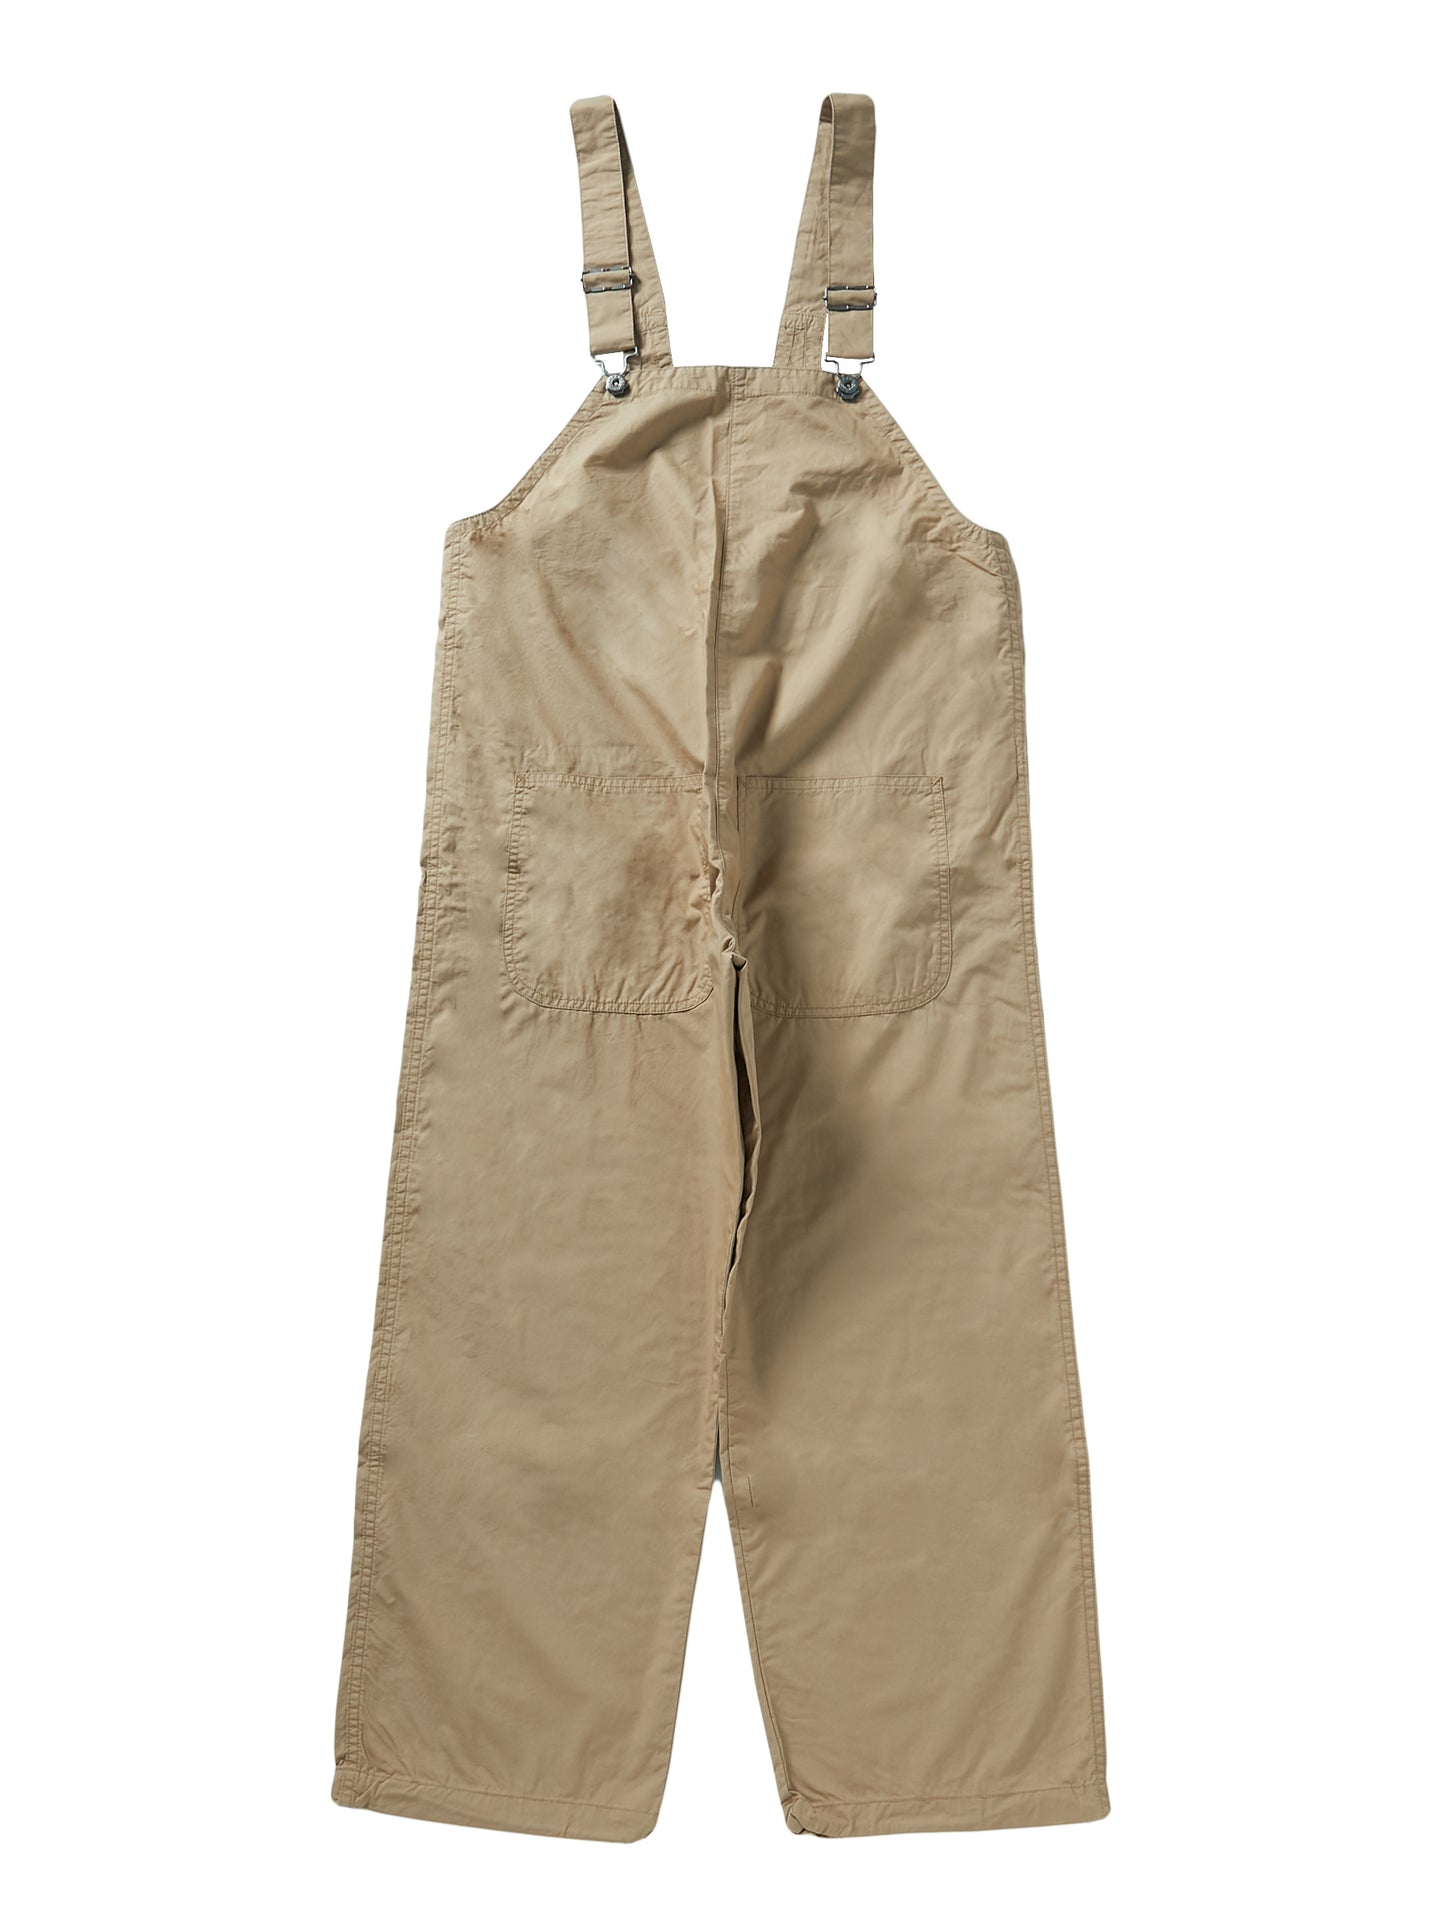 GUNG HO / WOMEN'S SIMPLE OVERALL